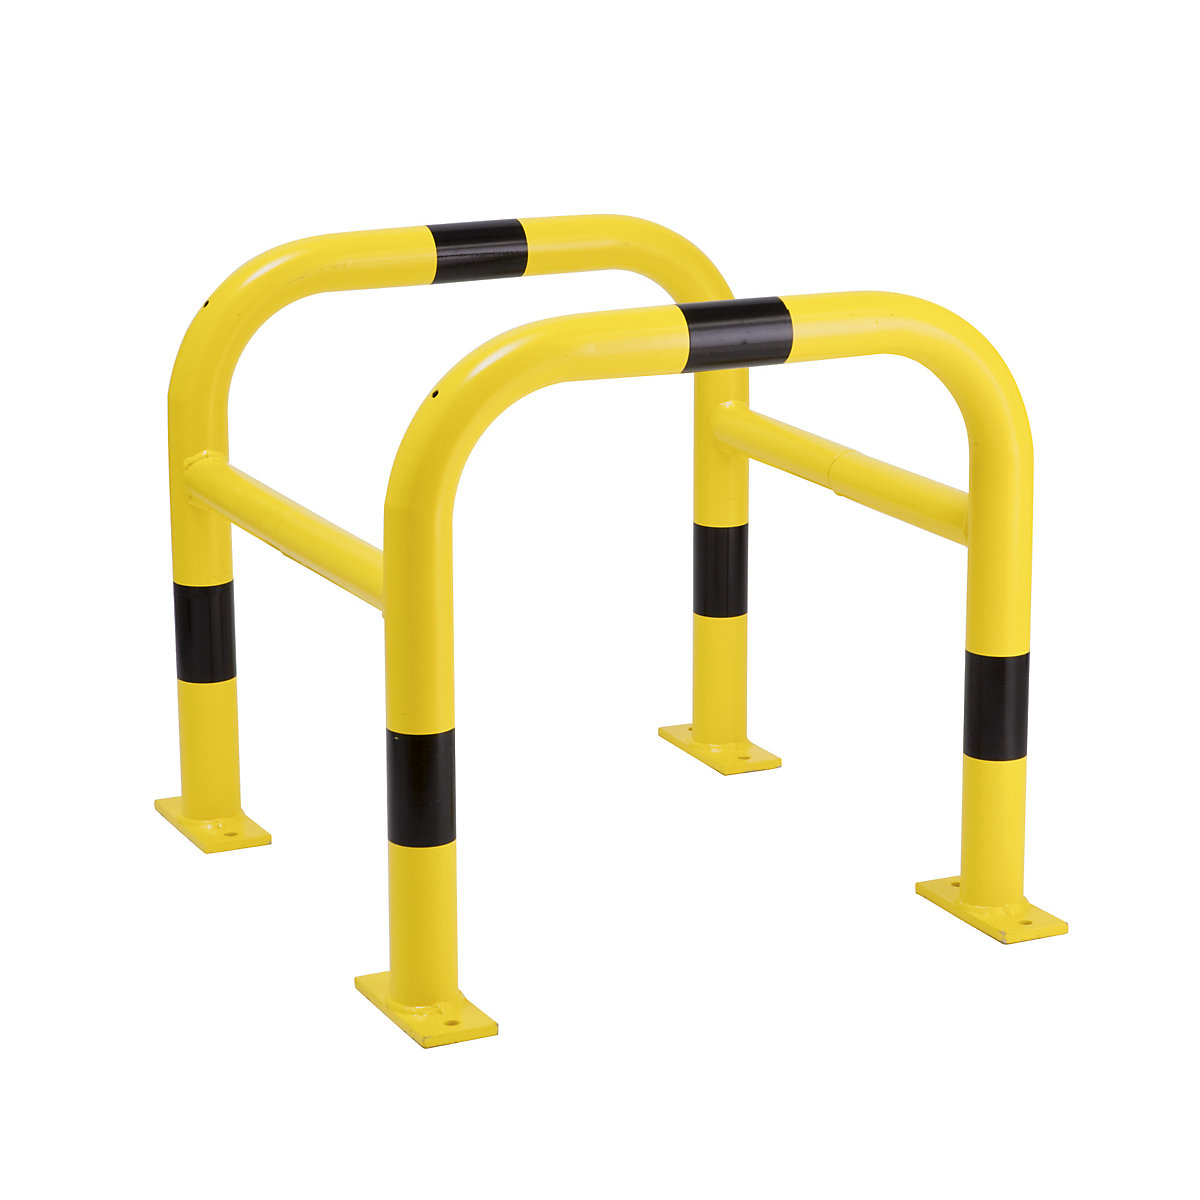 Crash protection for posts, galvanised and plastic coated, HxWxD 600 x 620 x 620 mm